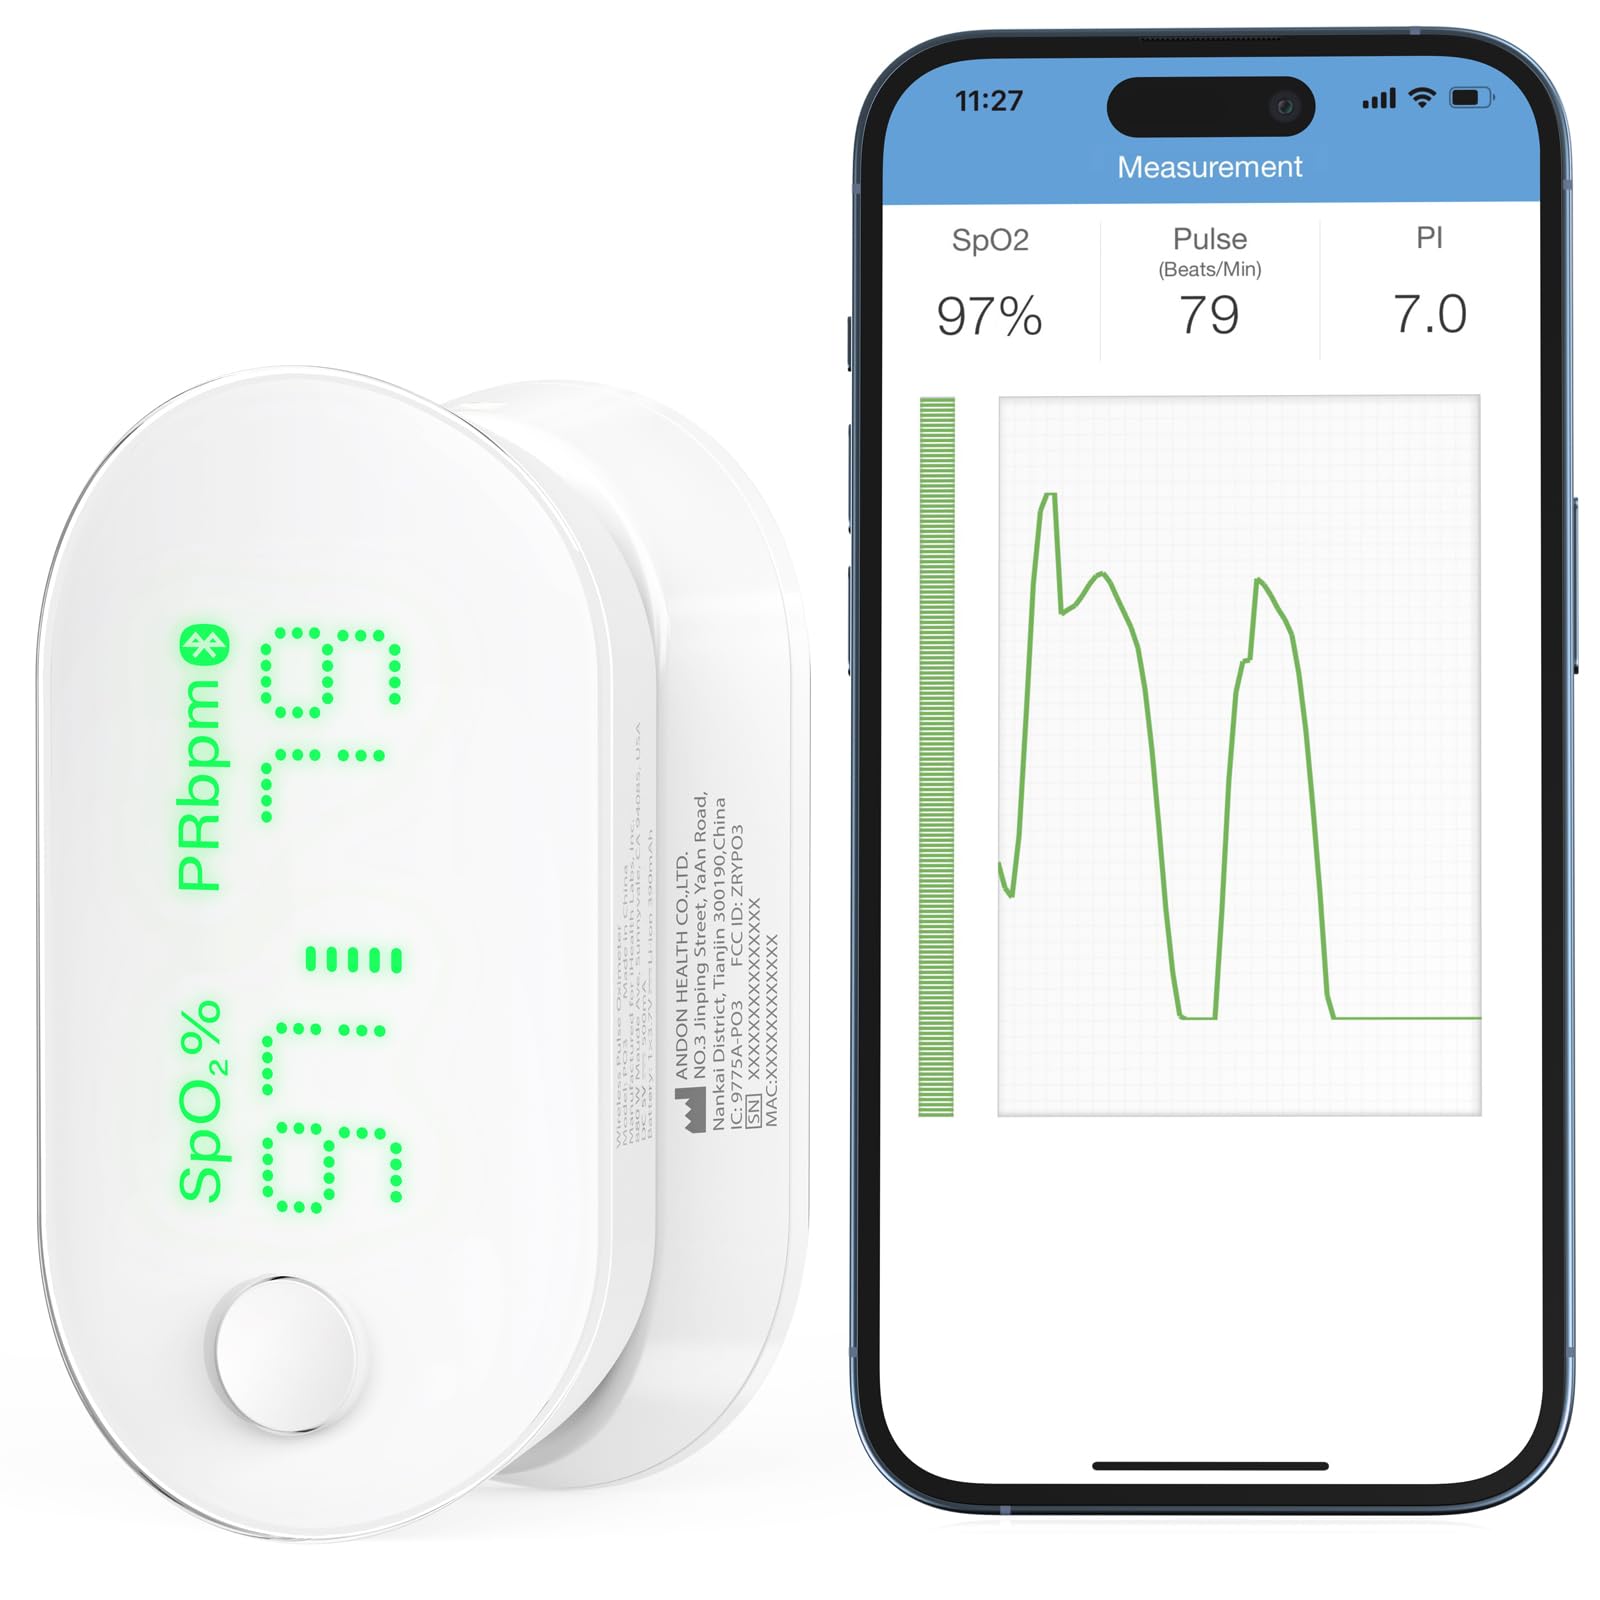 iHealth AIR Wireless Fingertip Pulse Oximeter $20.39 + Free Shipping